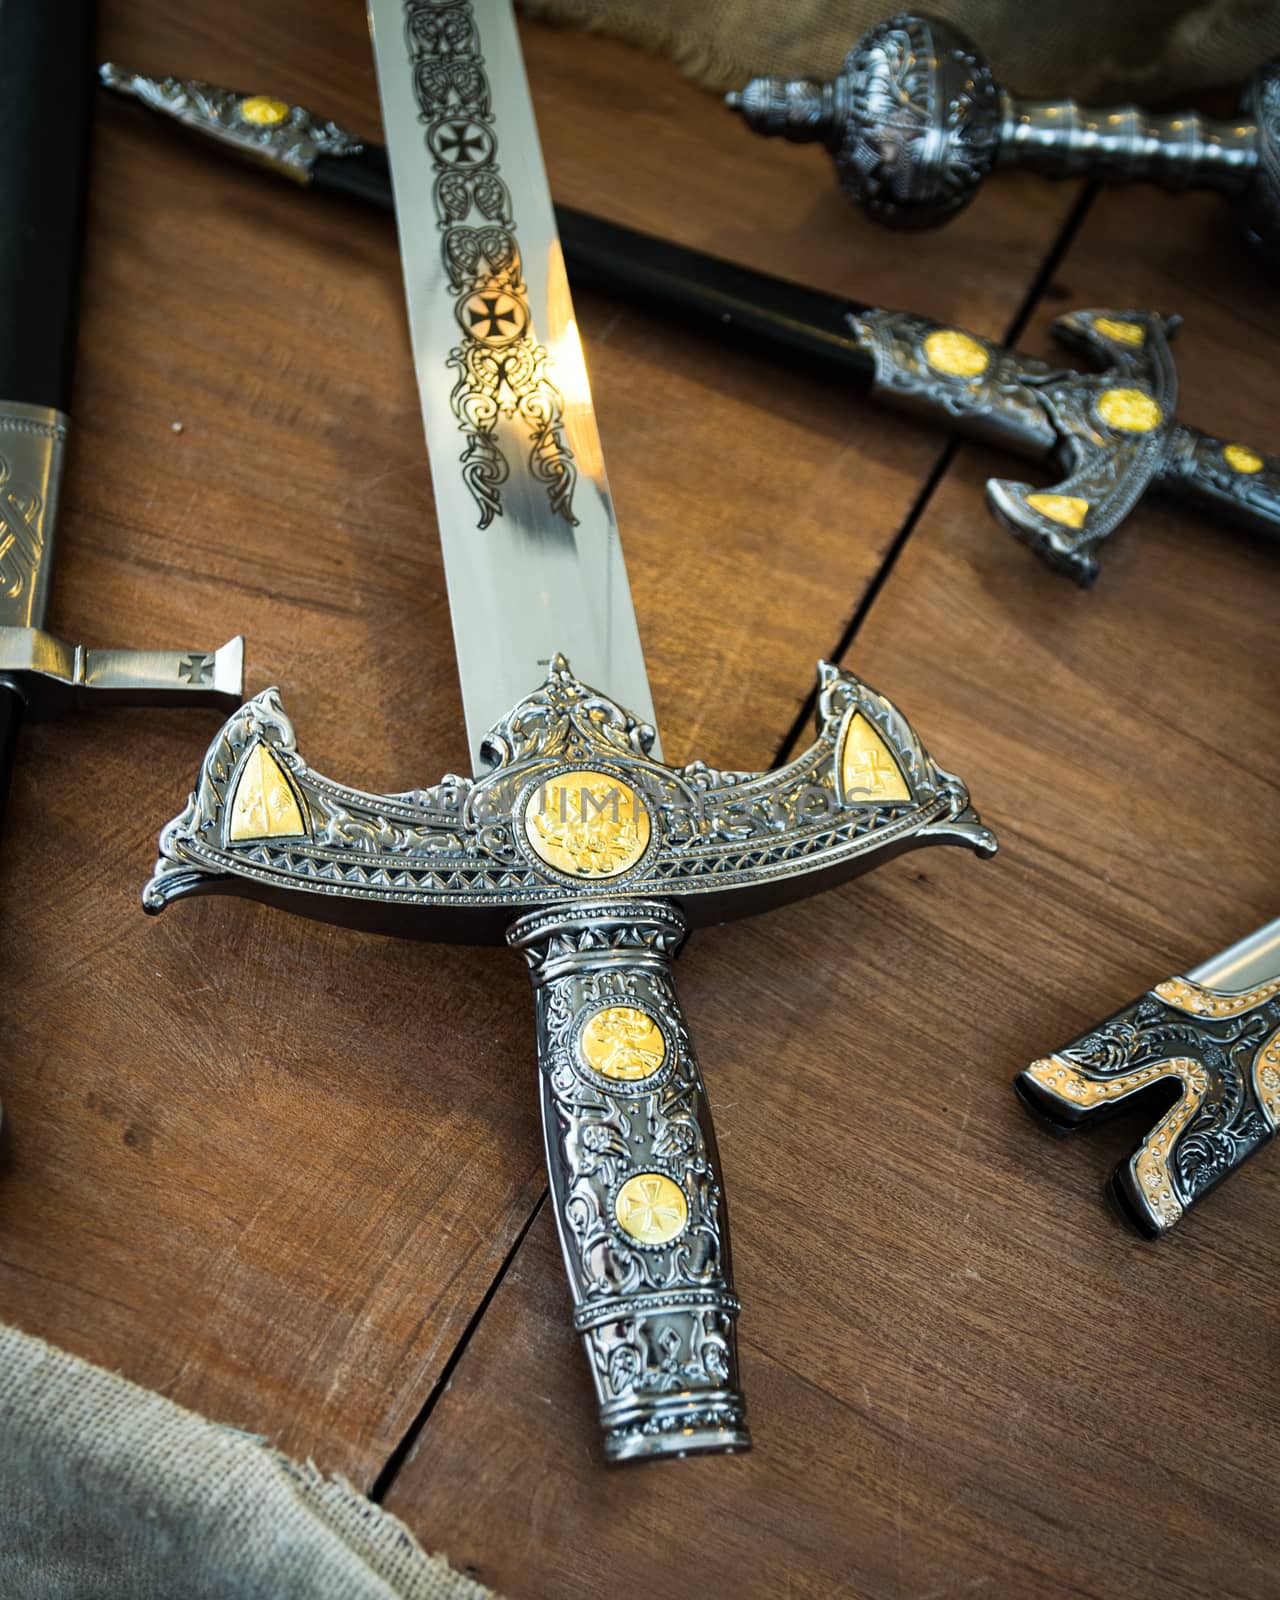 Detail of the hilt of a sword that dates from the time of the Crusaders.